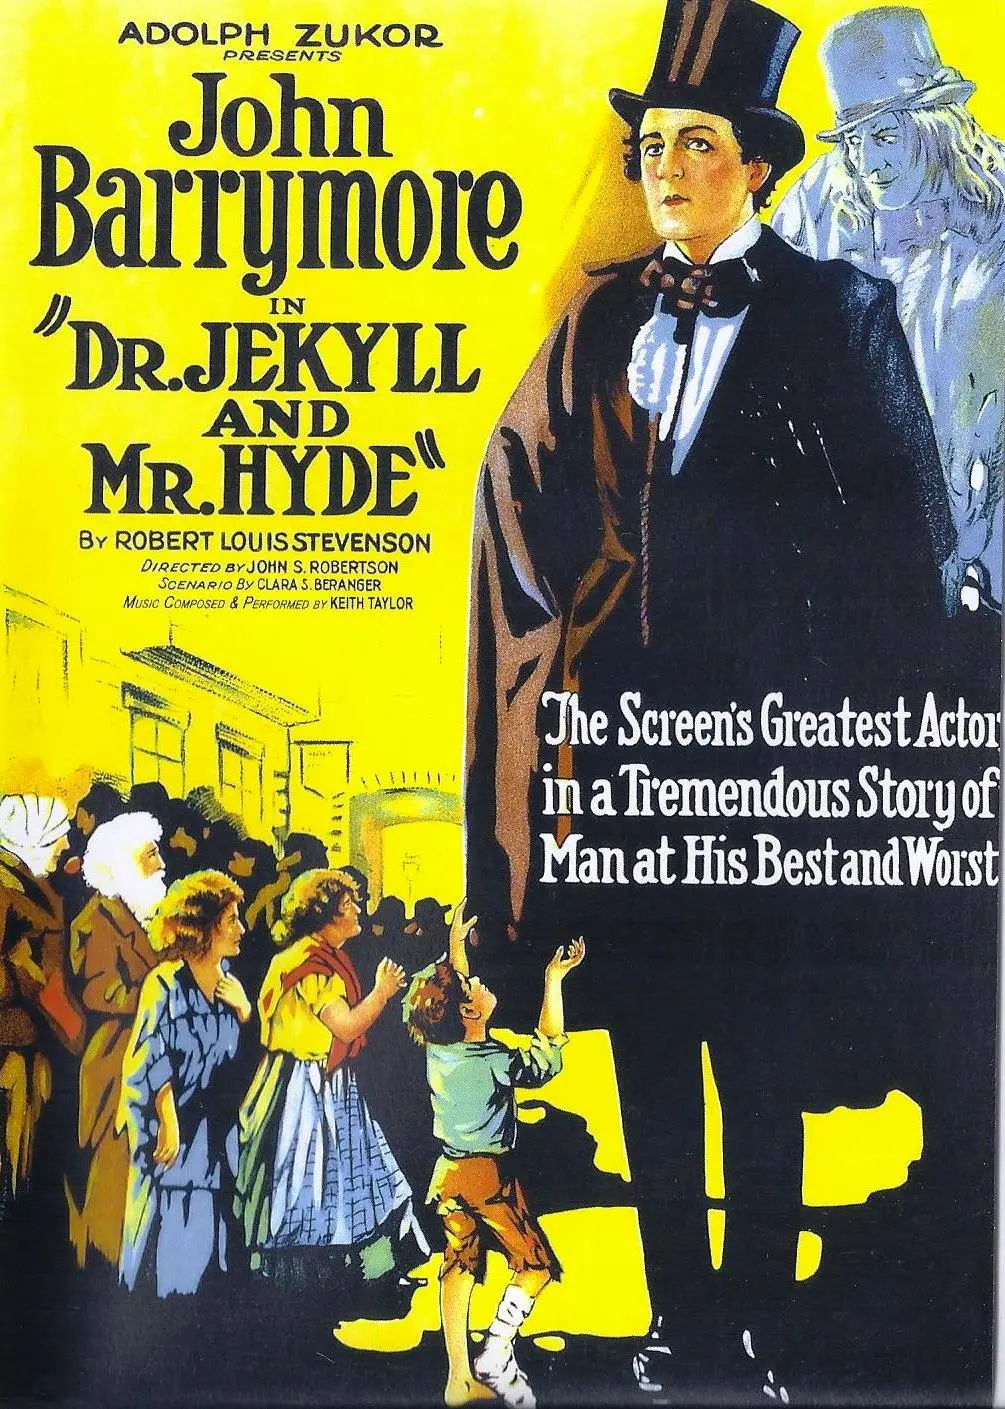 Dr Jekyll and Mr Hyde Silent Movie